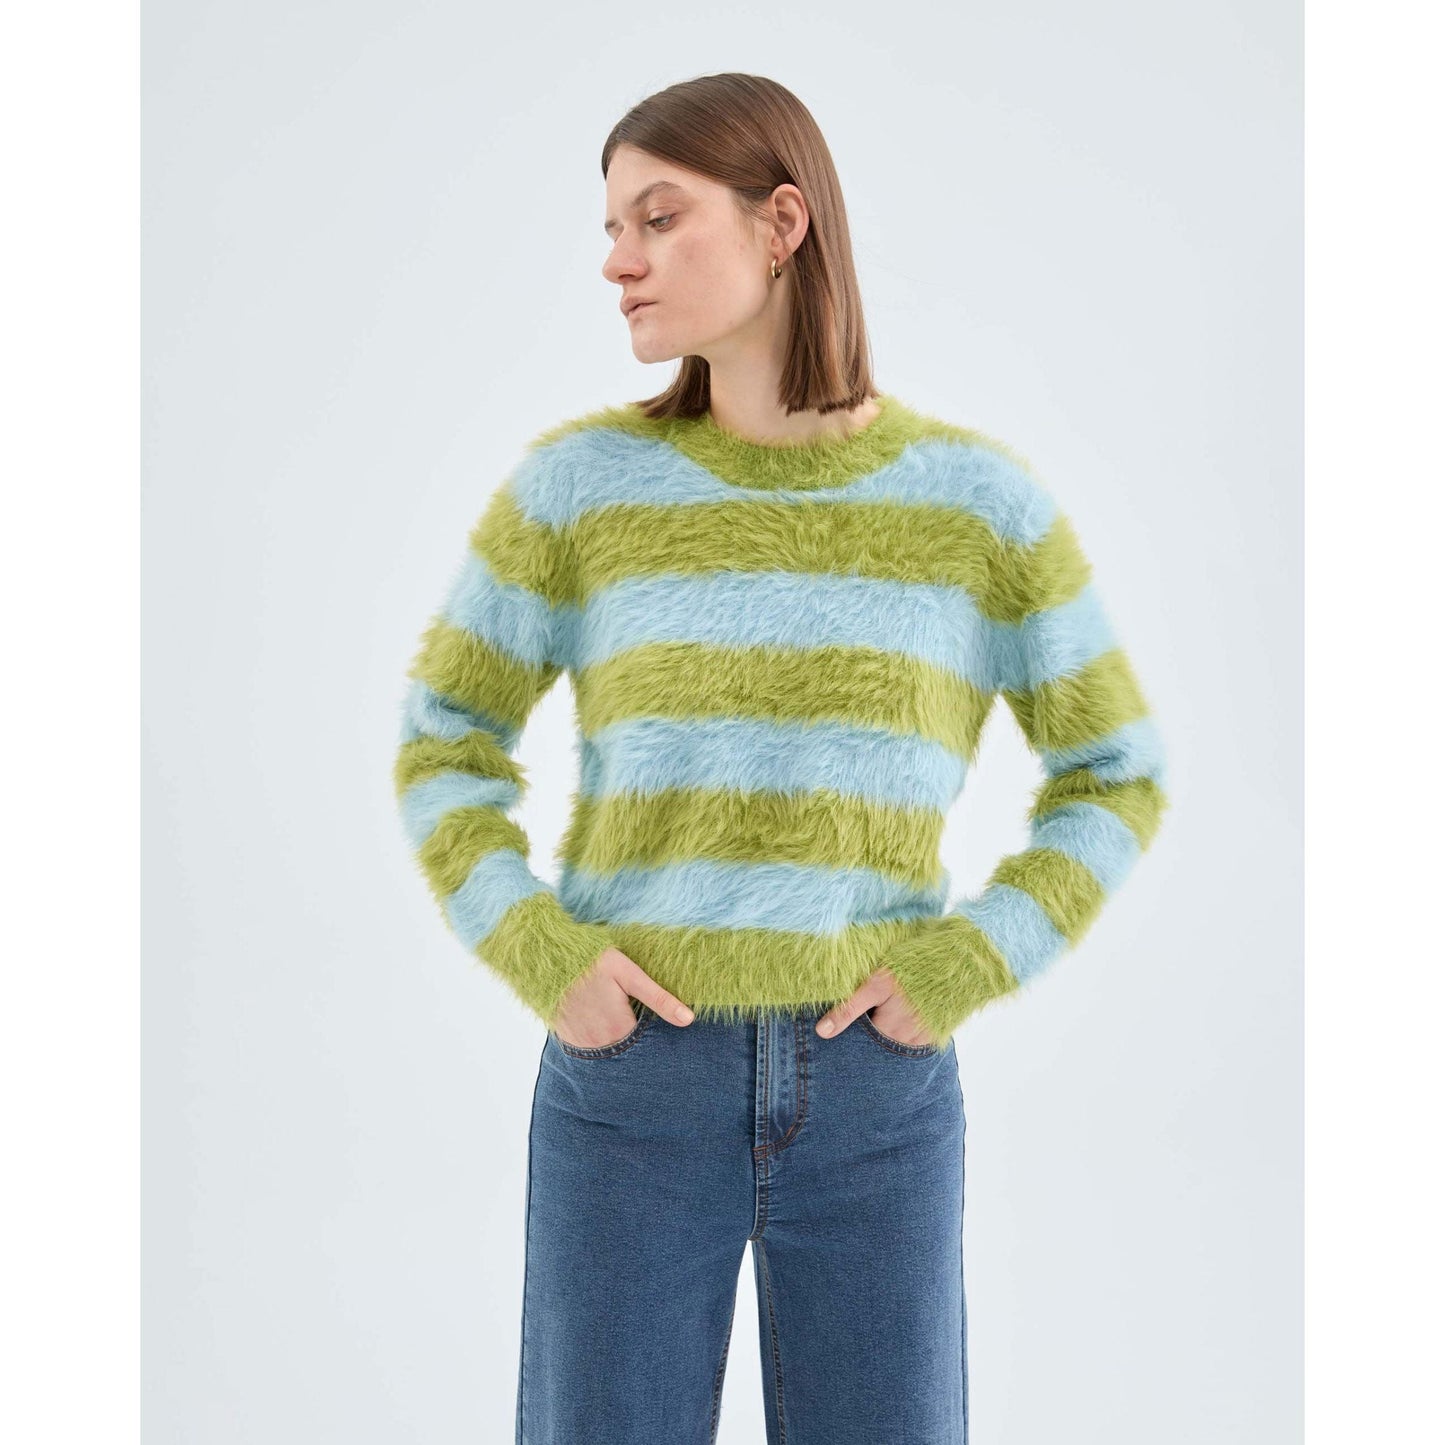 Compania Fantastica - Green and Blue Textured Striped Knit Sweater